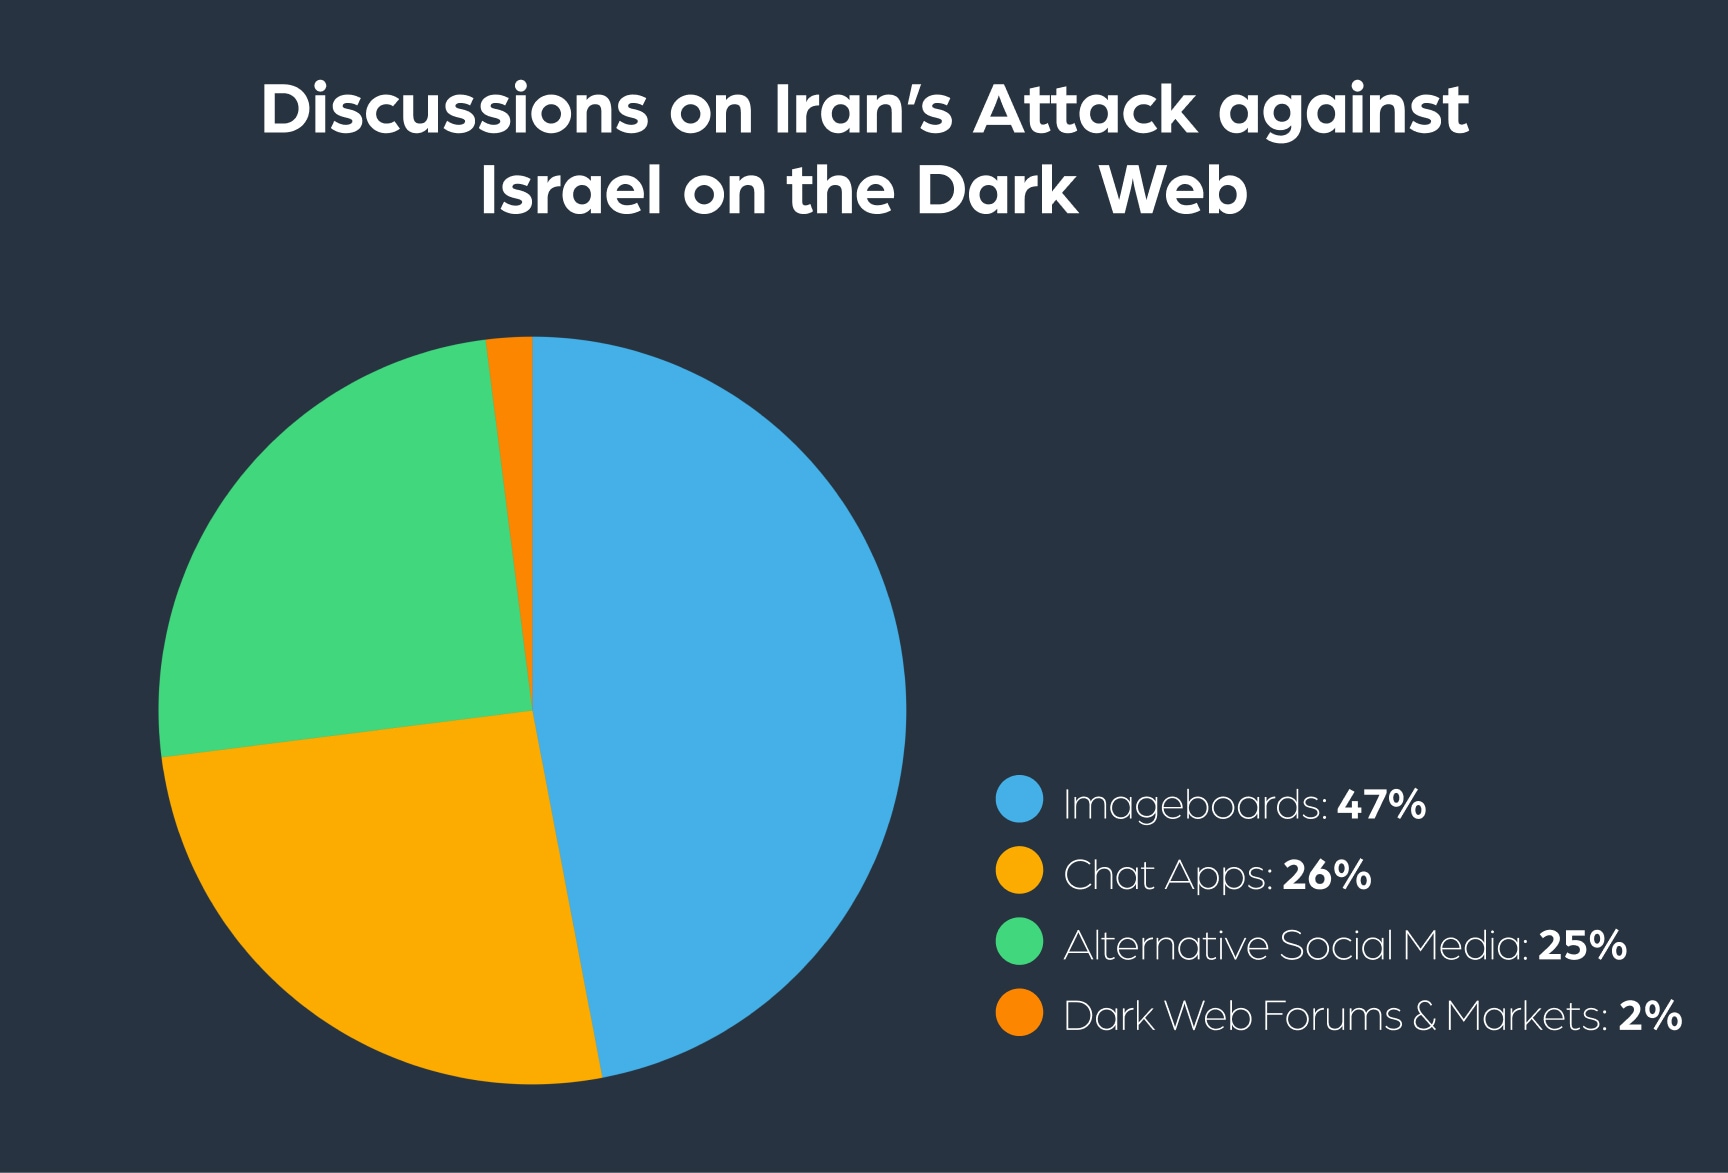 The distribution of discussions on Iran's attack against Israel on the deep and dark web